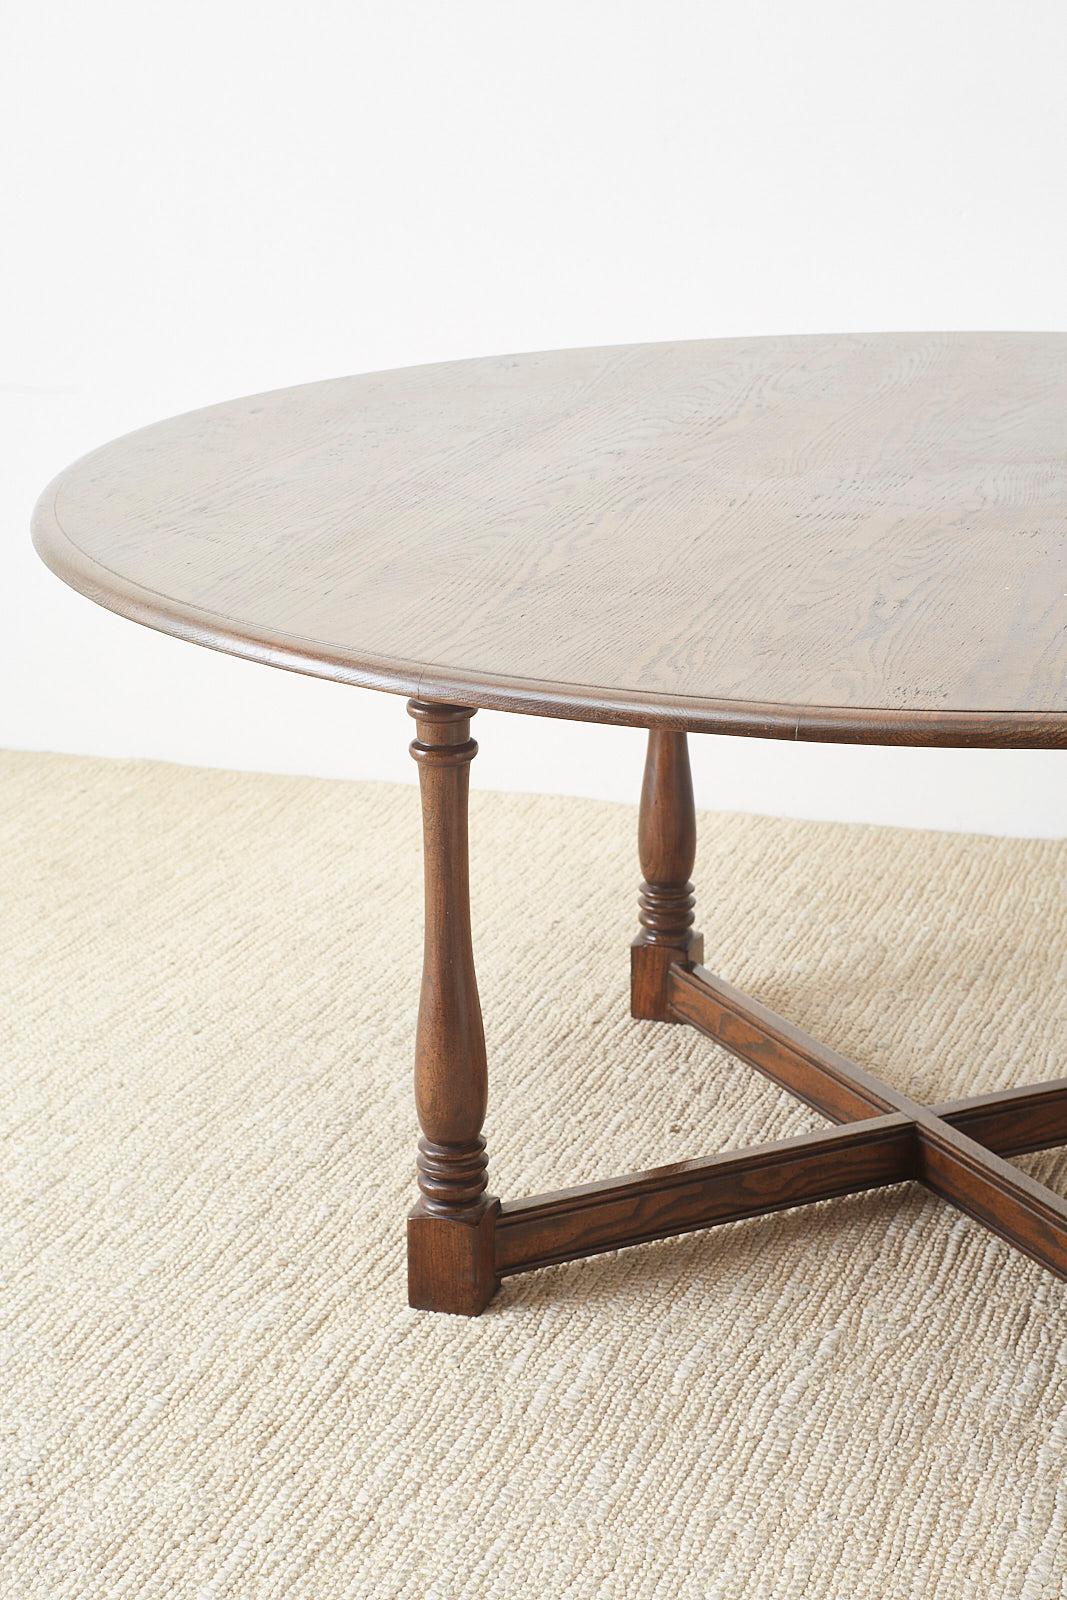 Hand-Crafted English Country Style Round Oak Dining Table